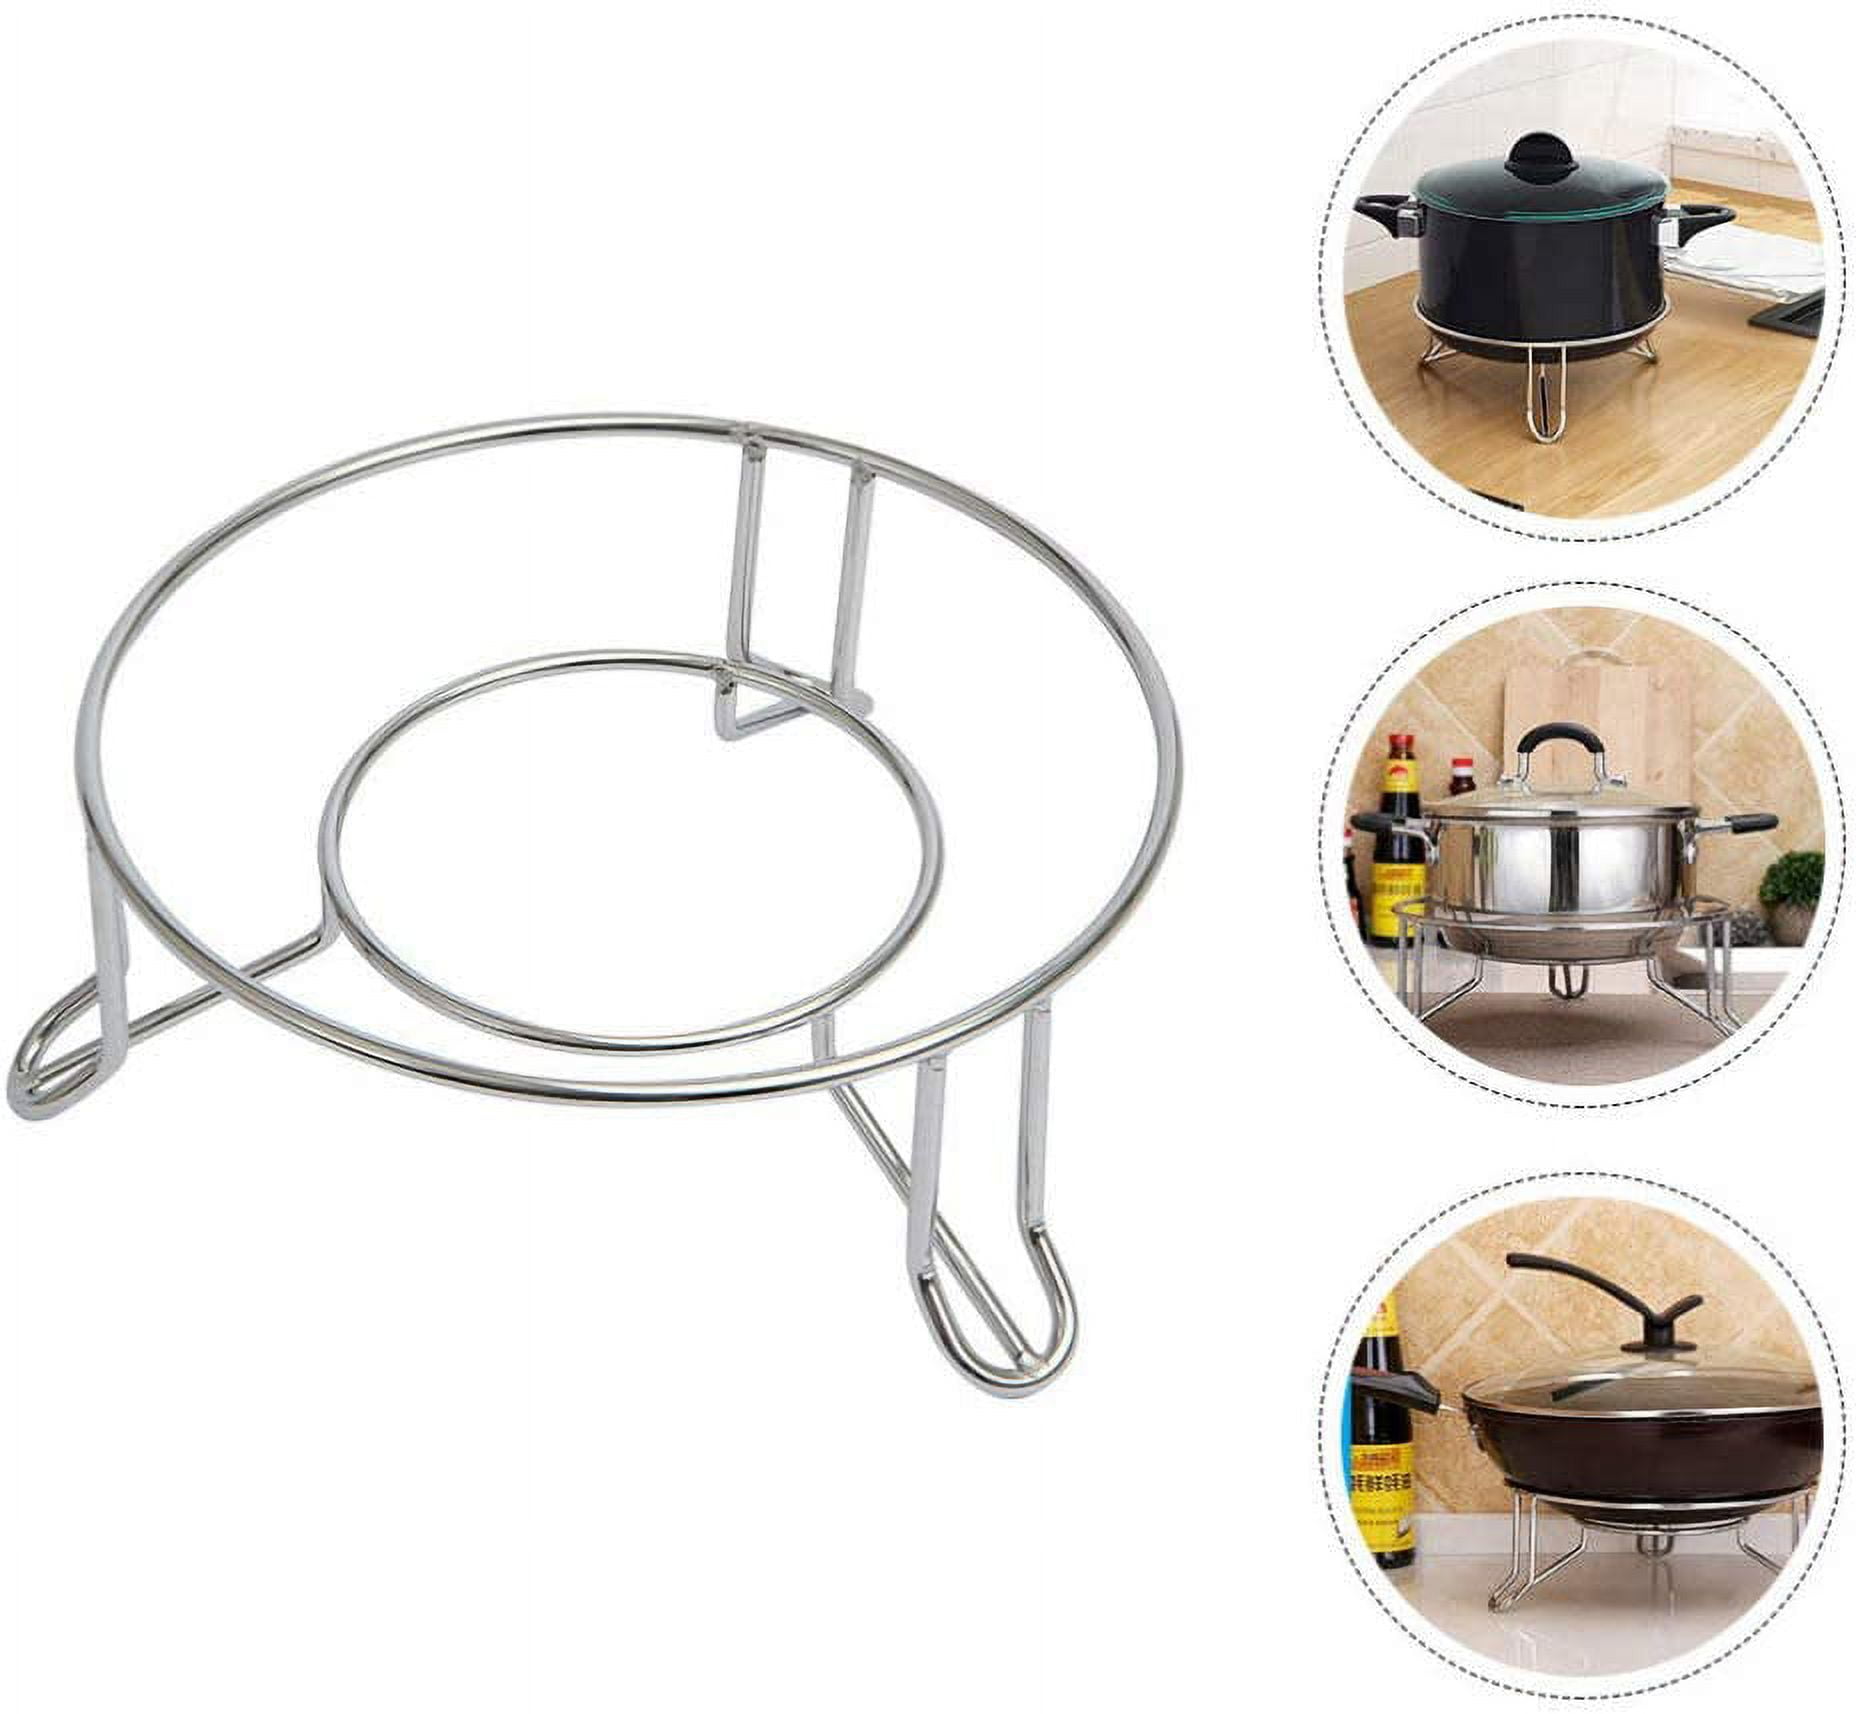 Round Stainless Steel Steamer Rack 7.6 8.5 9.33 10.23 Inch Diameter  Steaming Rack Stand Canner Canning Racks Stock Pot Steaming Tray Pressure